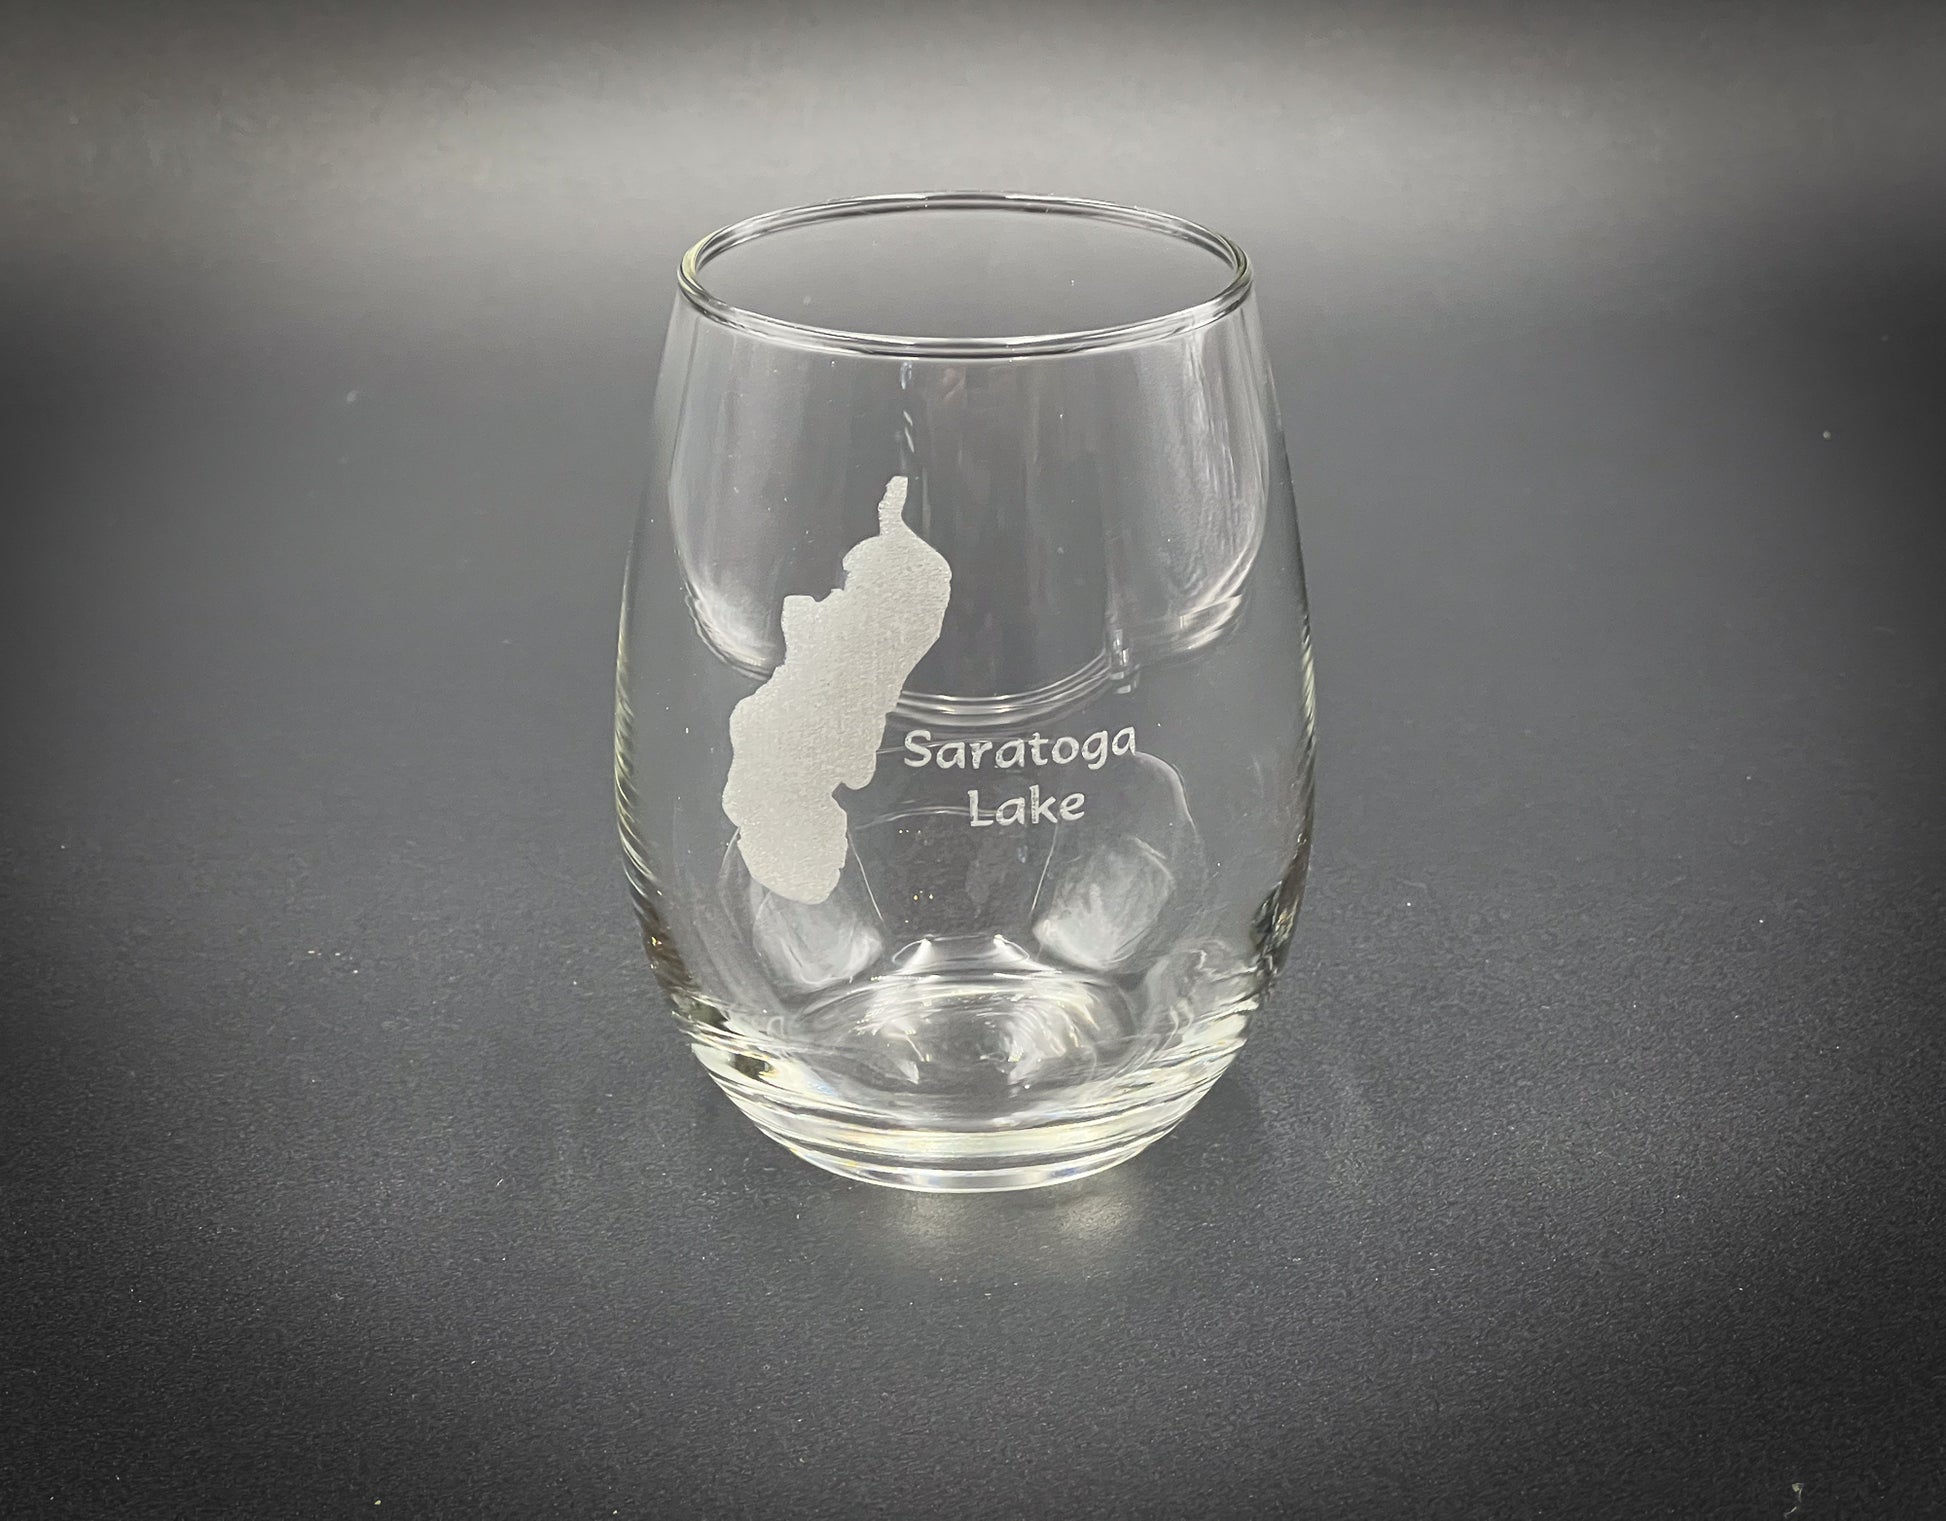 a wine glass with a silhouette of a woman on it